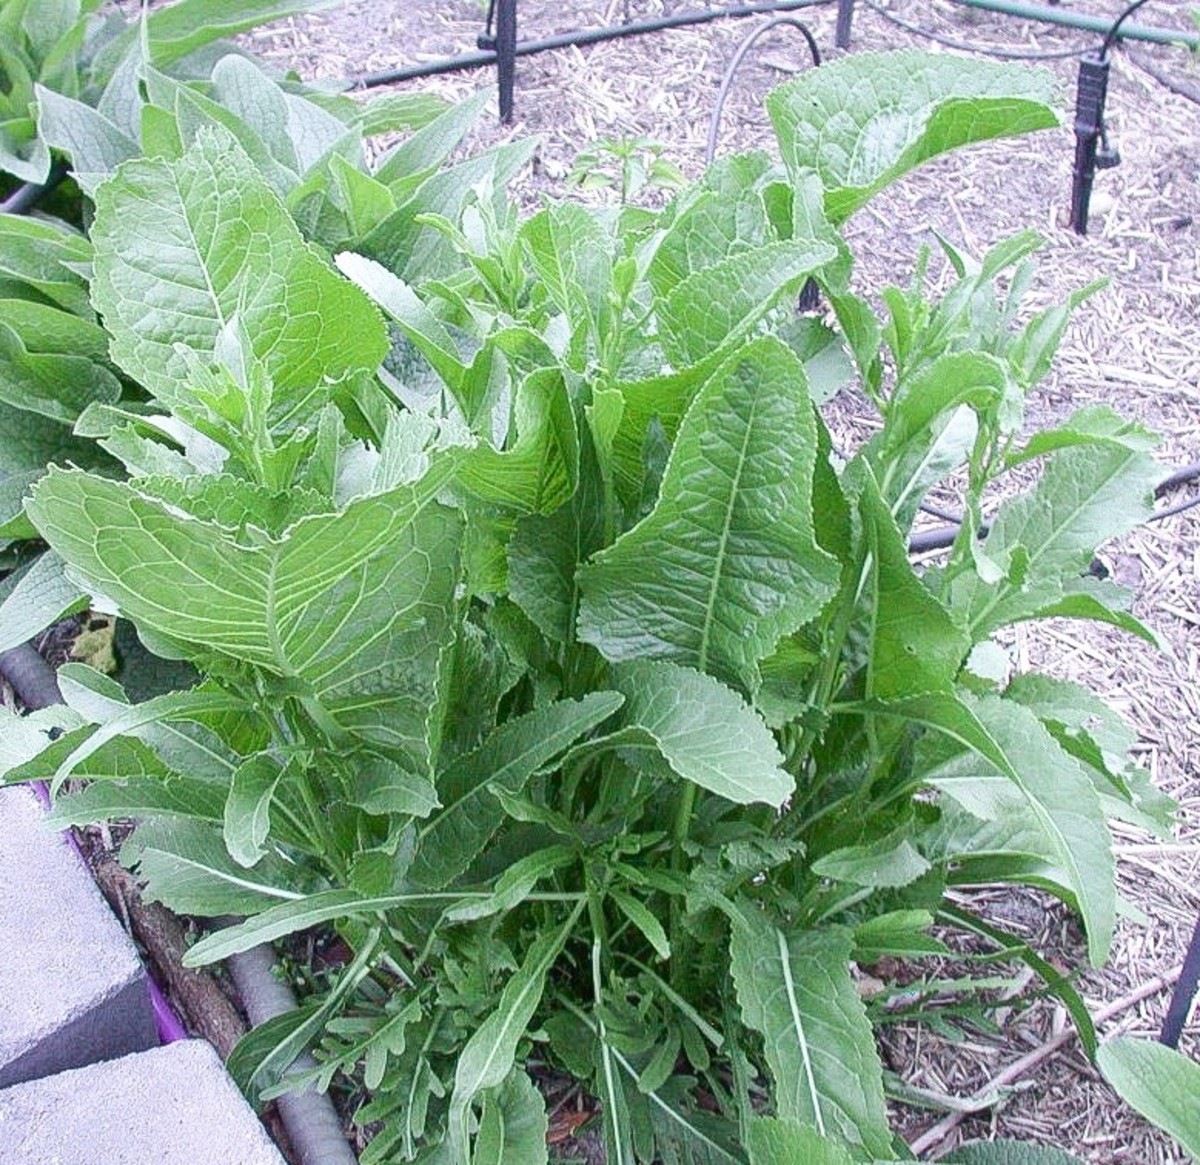 Horseradish leaves are edible and can be used like other greens.